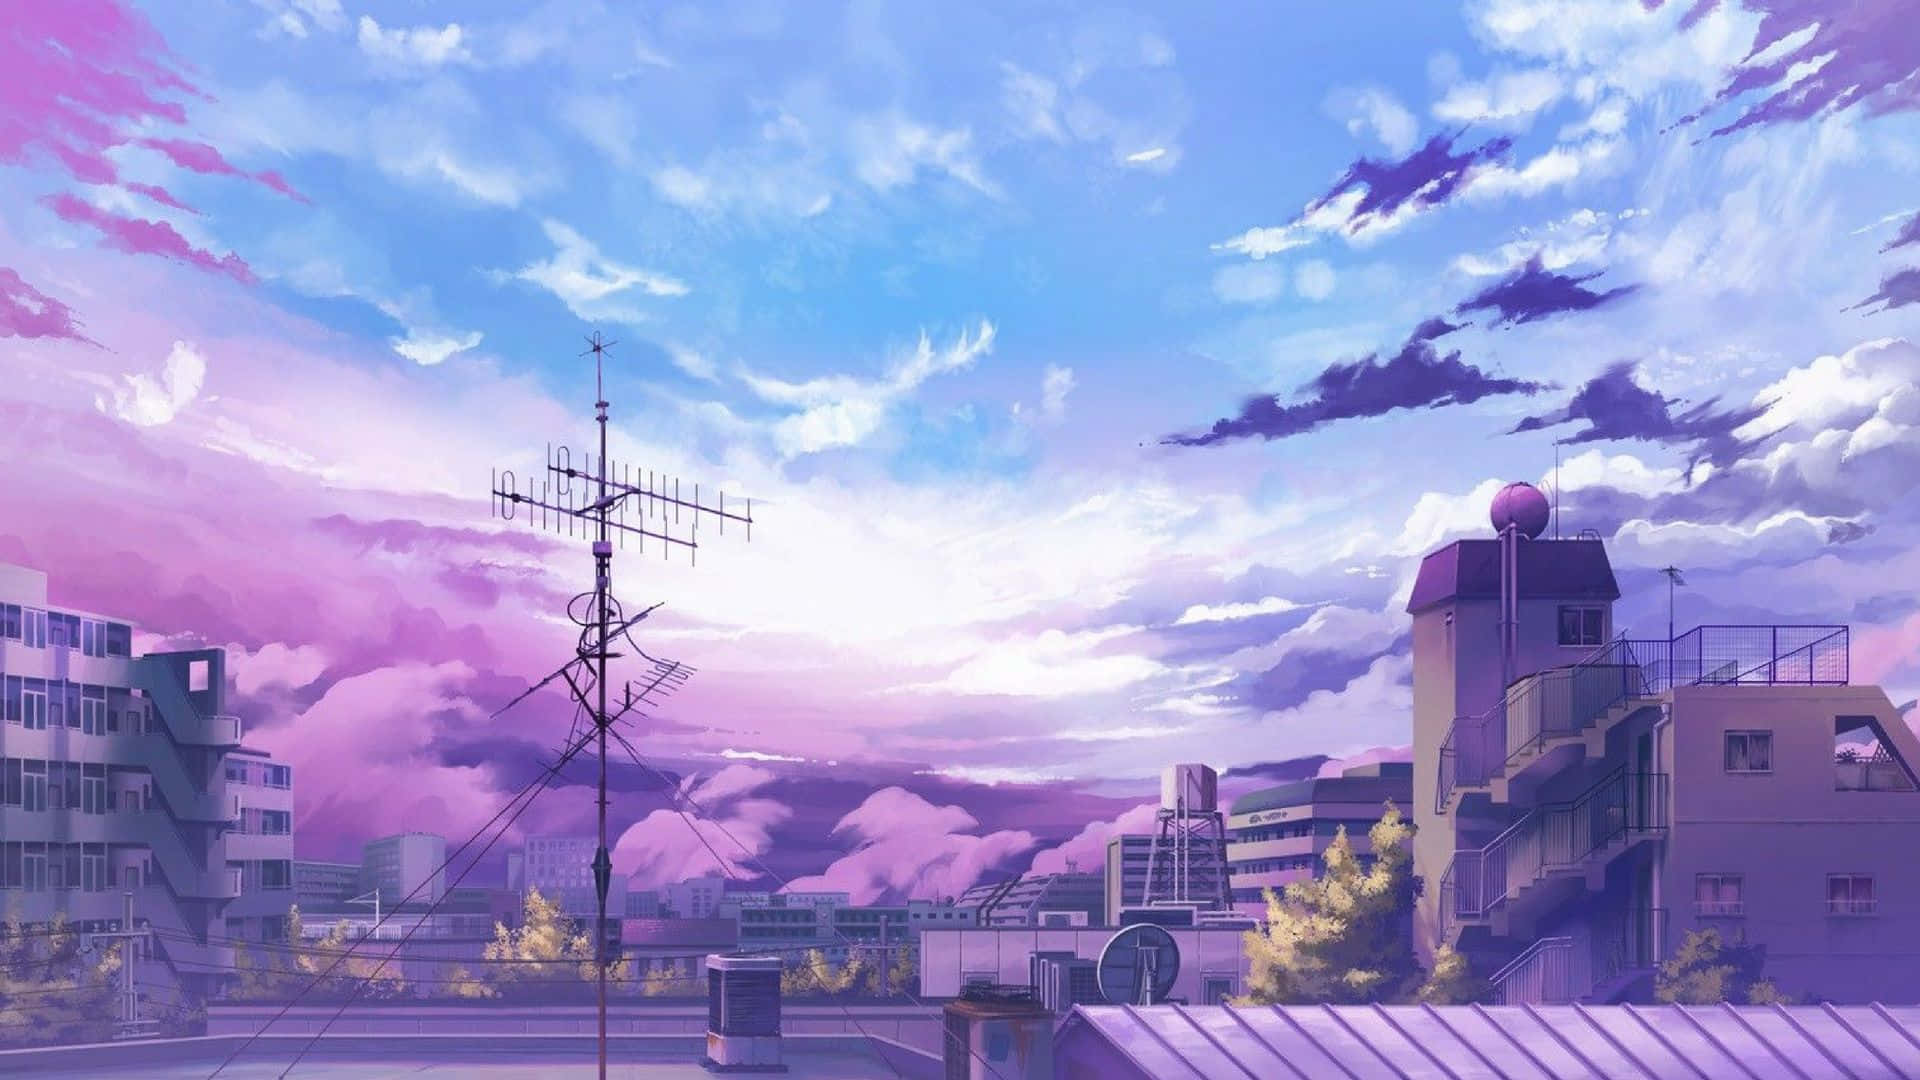 Free download Anime city wallpapers HD for desktop backgrounds [1600x900]  for your Desktop, Mobile & Tablet | Explore 26+ Anime City Spring Wallpapers  | City Background, City Wallpaper, City Backgrounds